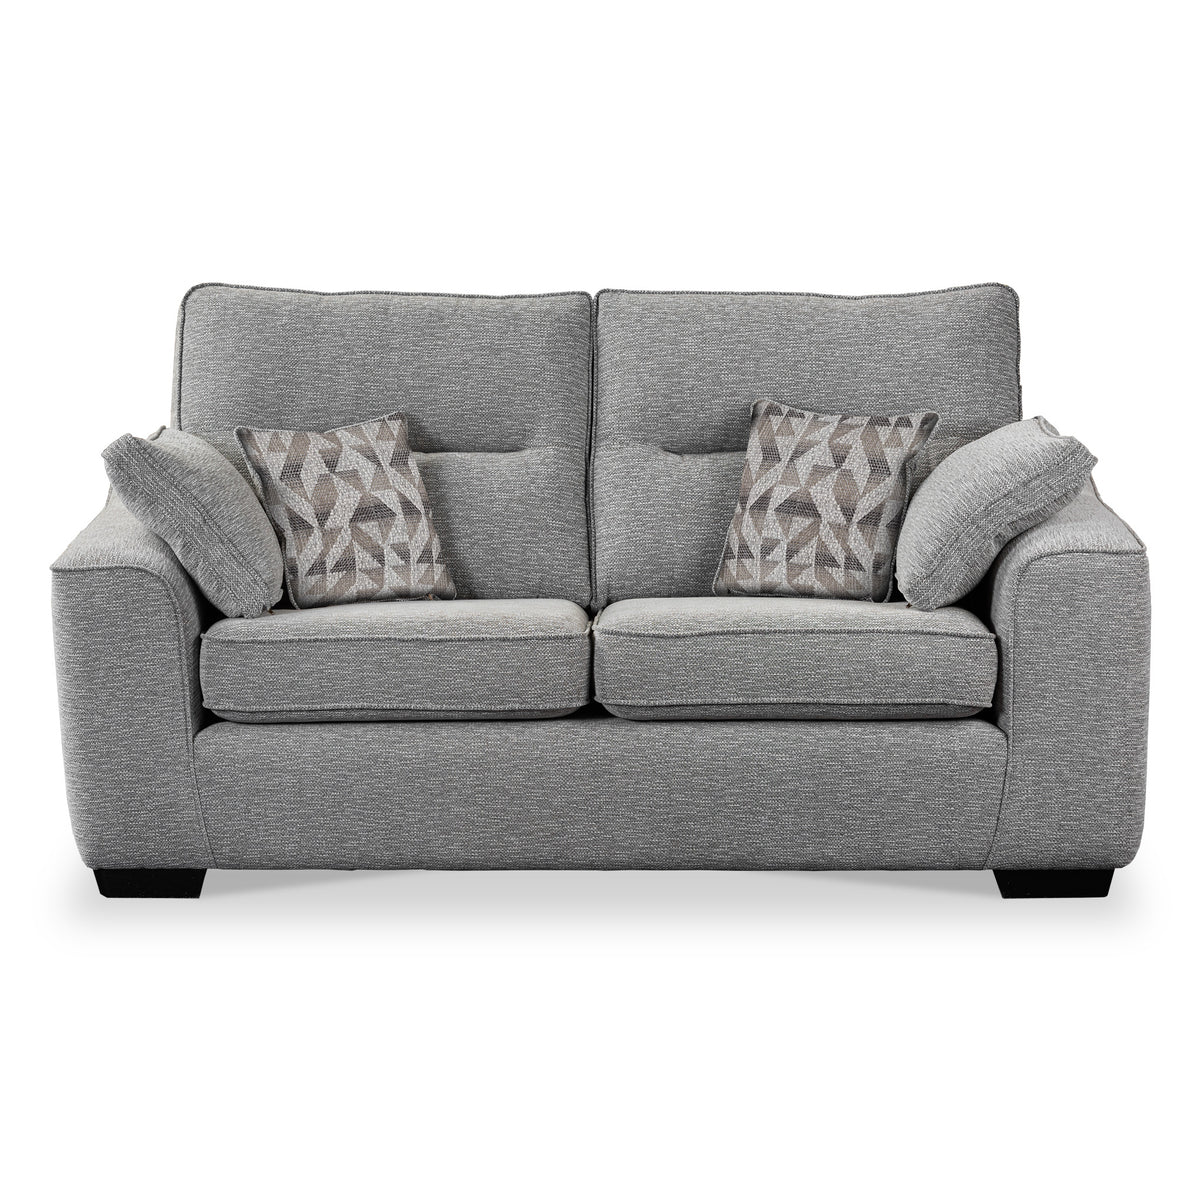 Sudbury Oatmeal 2 Seater Sofabed with Oatmeal Scatter Cushions